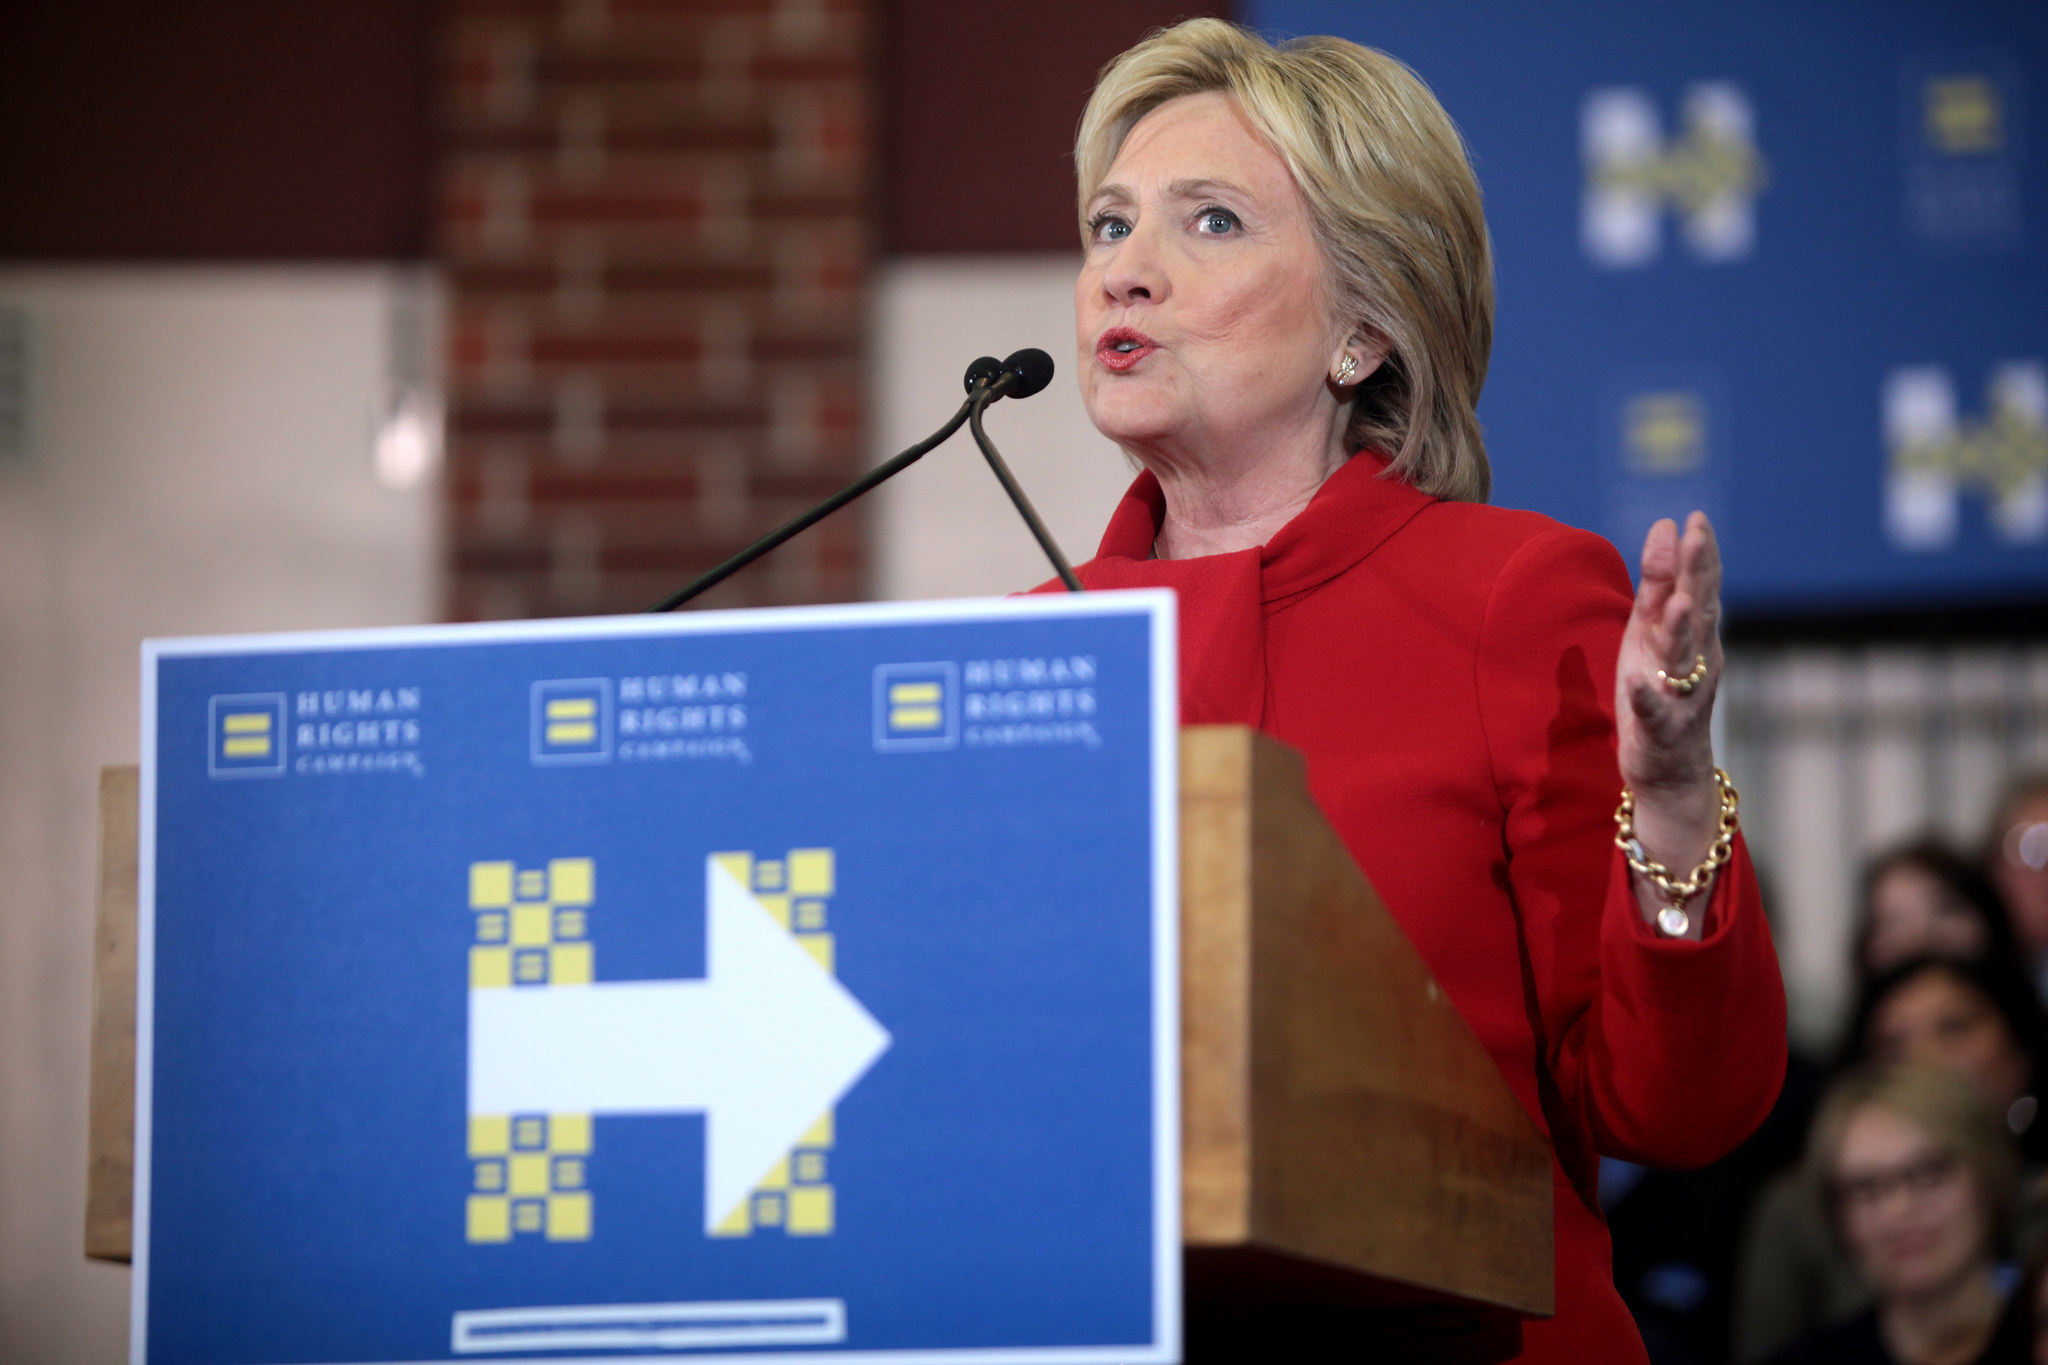 Hillary Clinton campaigns in West Des Moines, Iowa, Jan. 24. (Gage Skidmore)